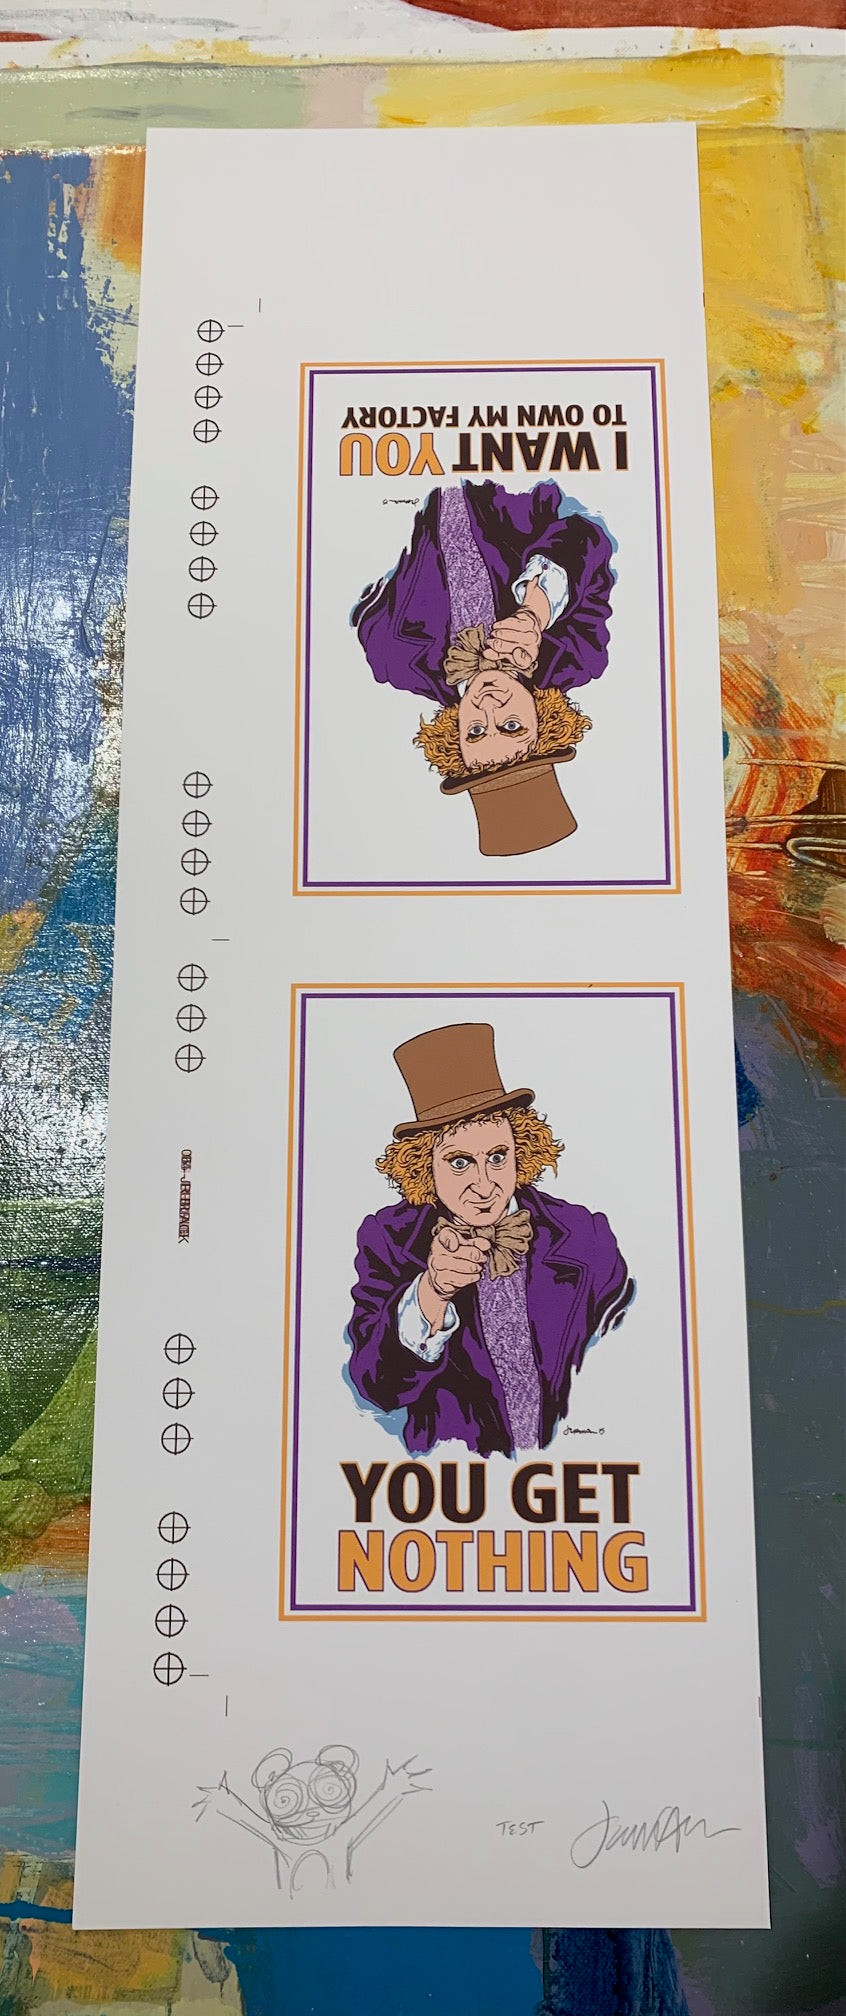 I WANT YOU/YOU GET NOTHING Willy Wonka TEST with registration and remarque